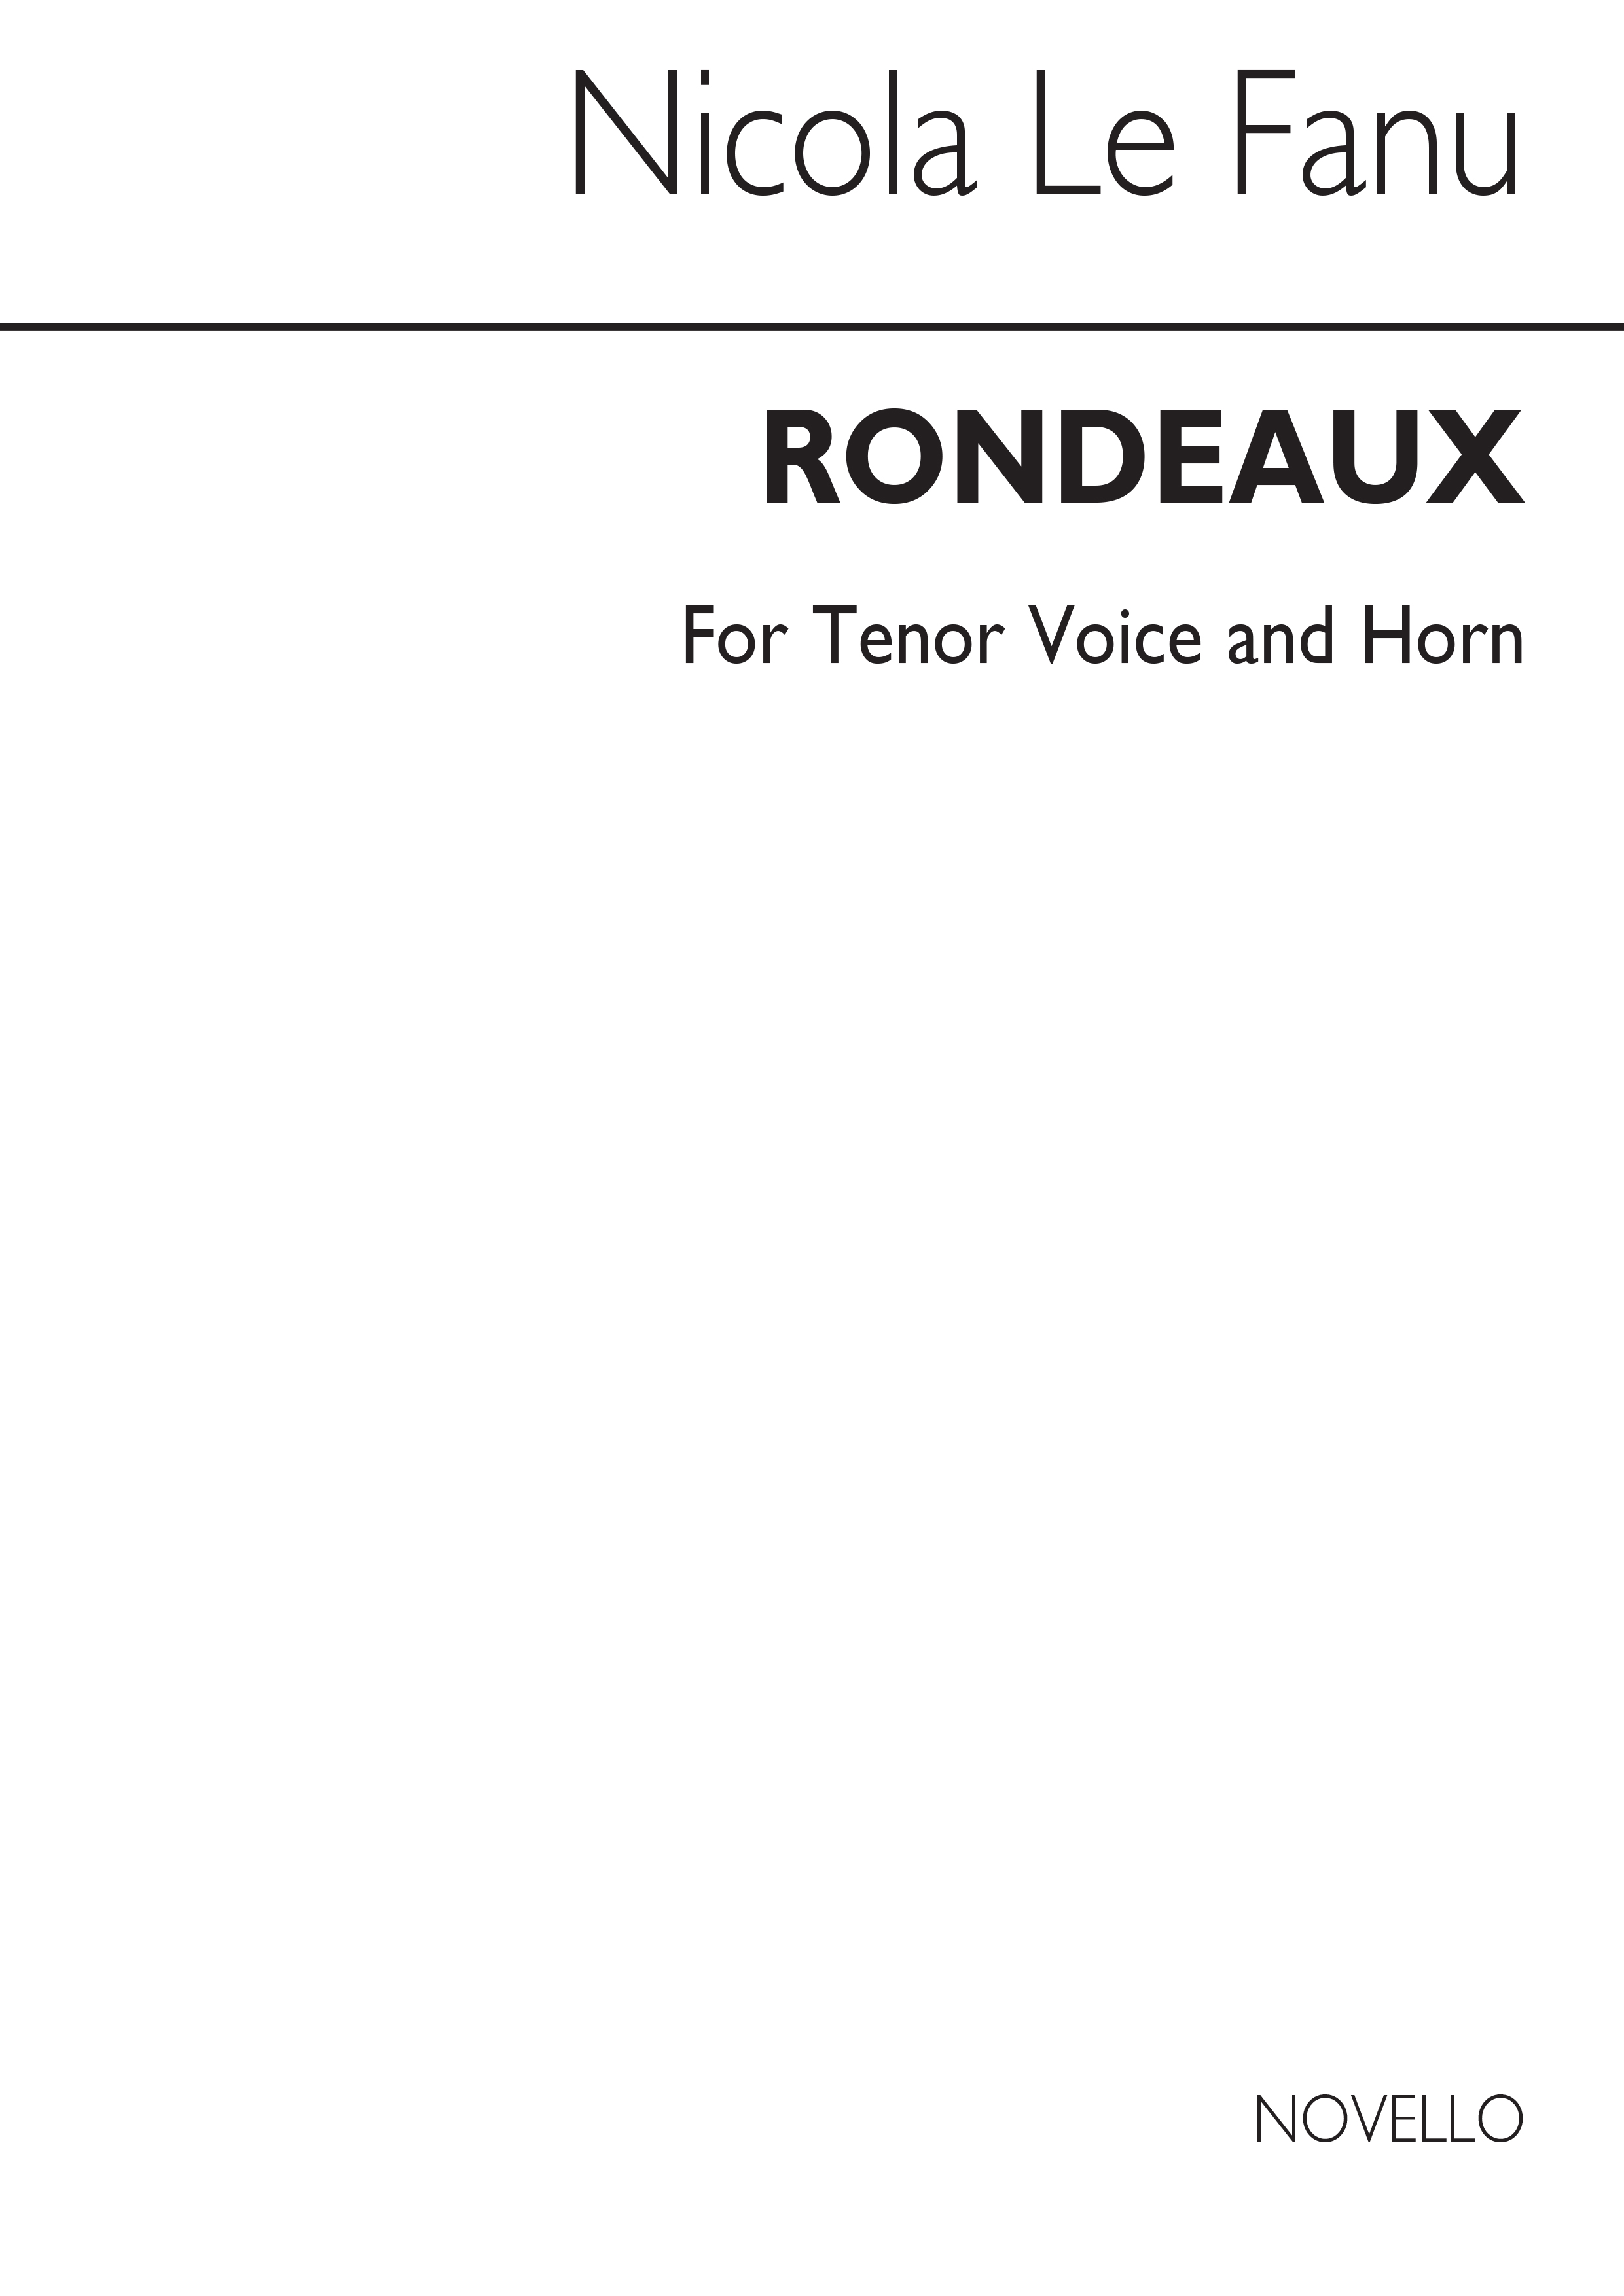 Lefanu: Rondeaux for Tenor and Horn